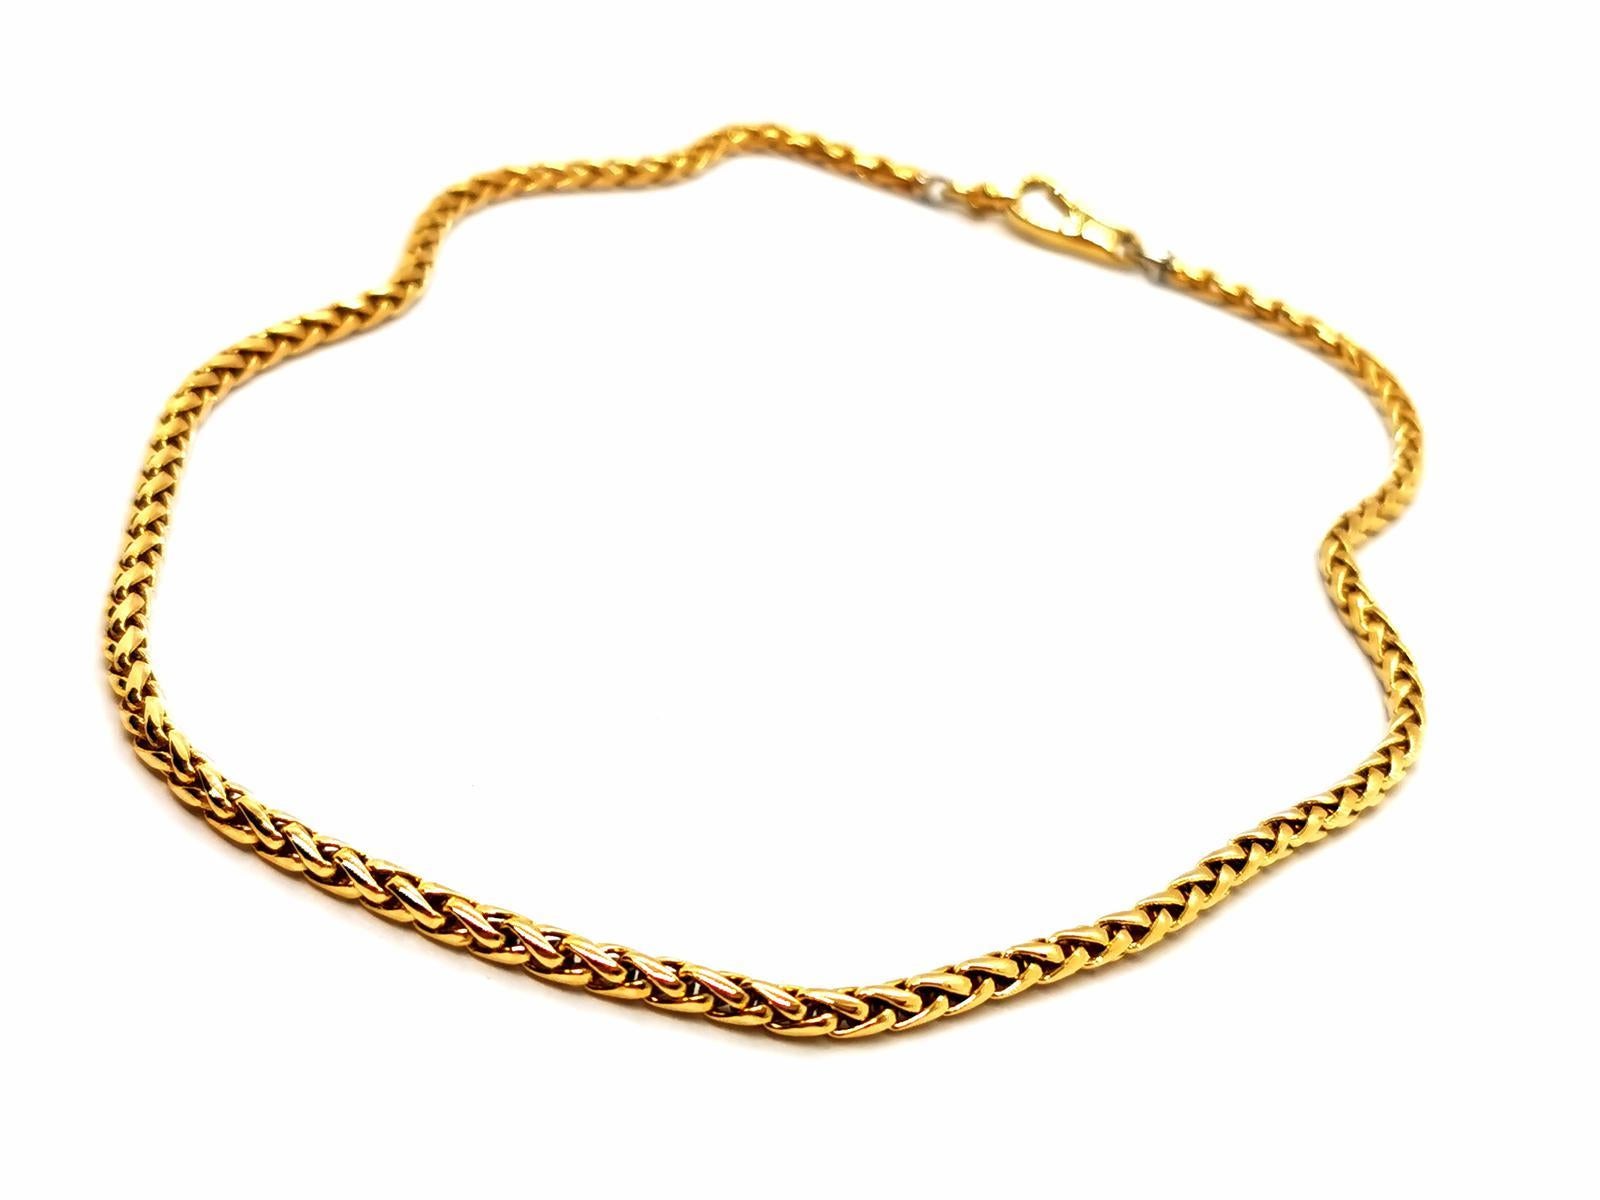 Fred house necklace in yellow gold 750 thousandths (18 carats). palm mesh. length: 41 cm. width: 0.28 cm. total weight: 32.2 g. eagle head hallmark. excellent condition

